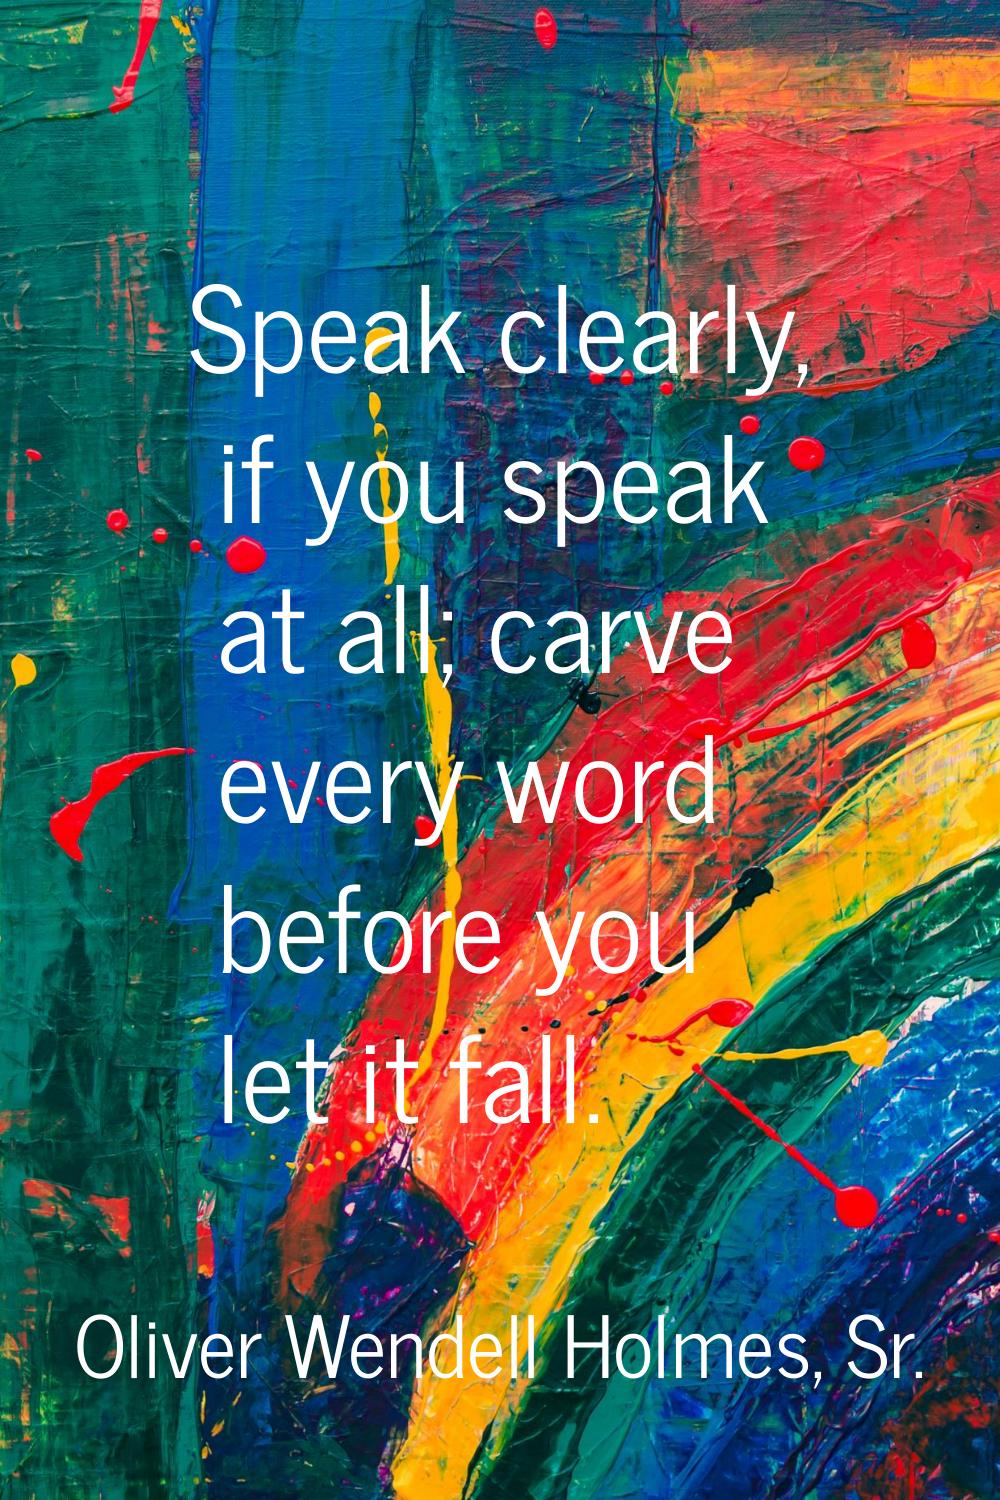 Speak clearly, if you speak at all; carve every word before you let it fall.